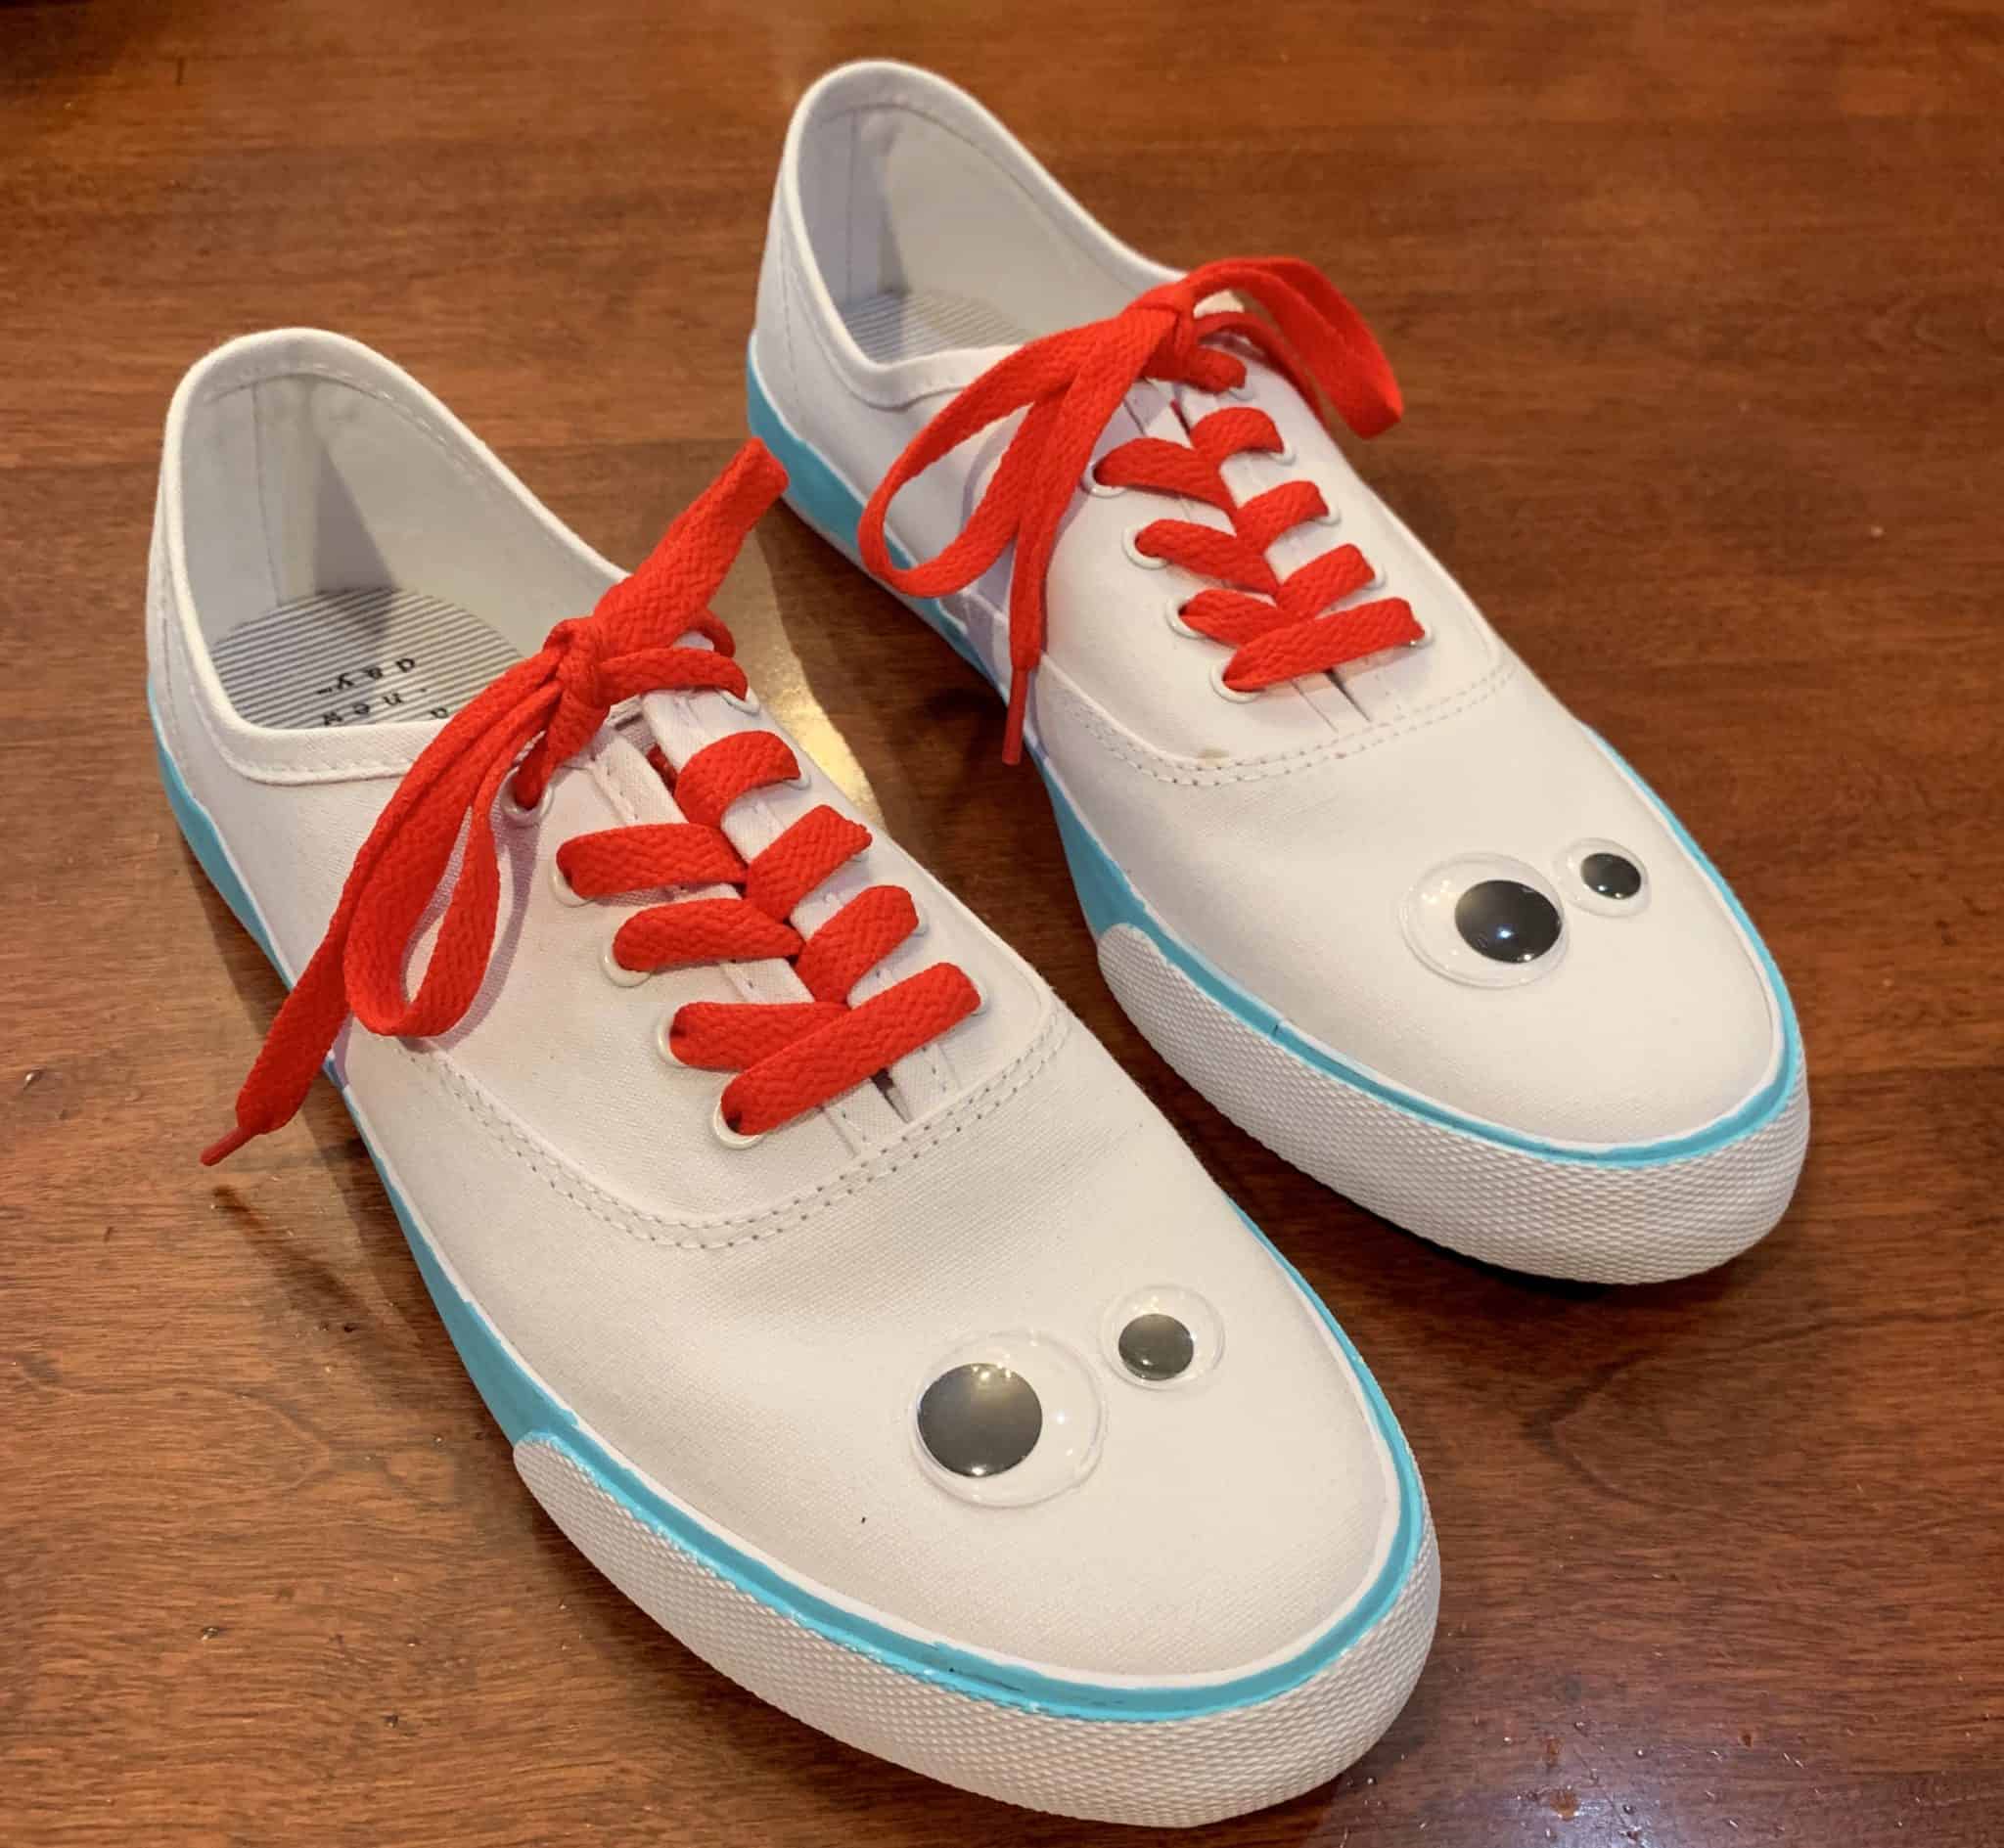 DISNEYBOUNDING: TOY STORY DIY FORKY SHOES - A Mother's Random Thoughts